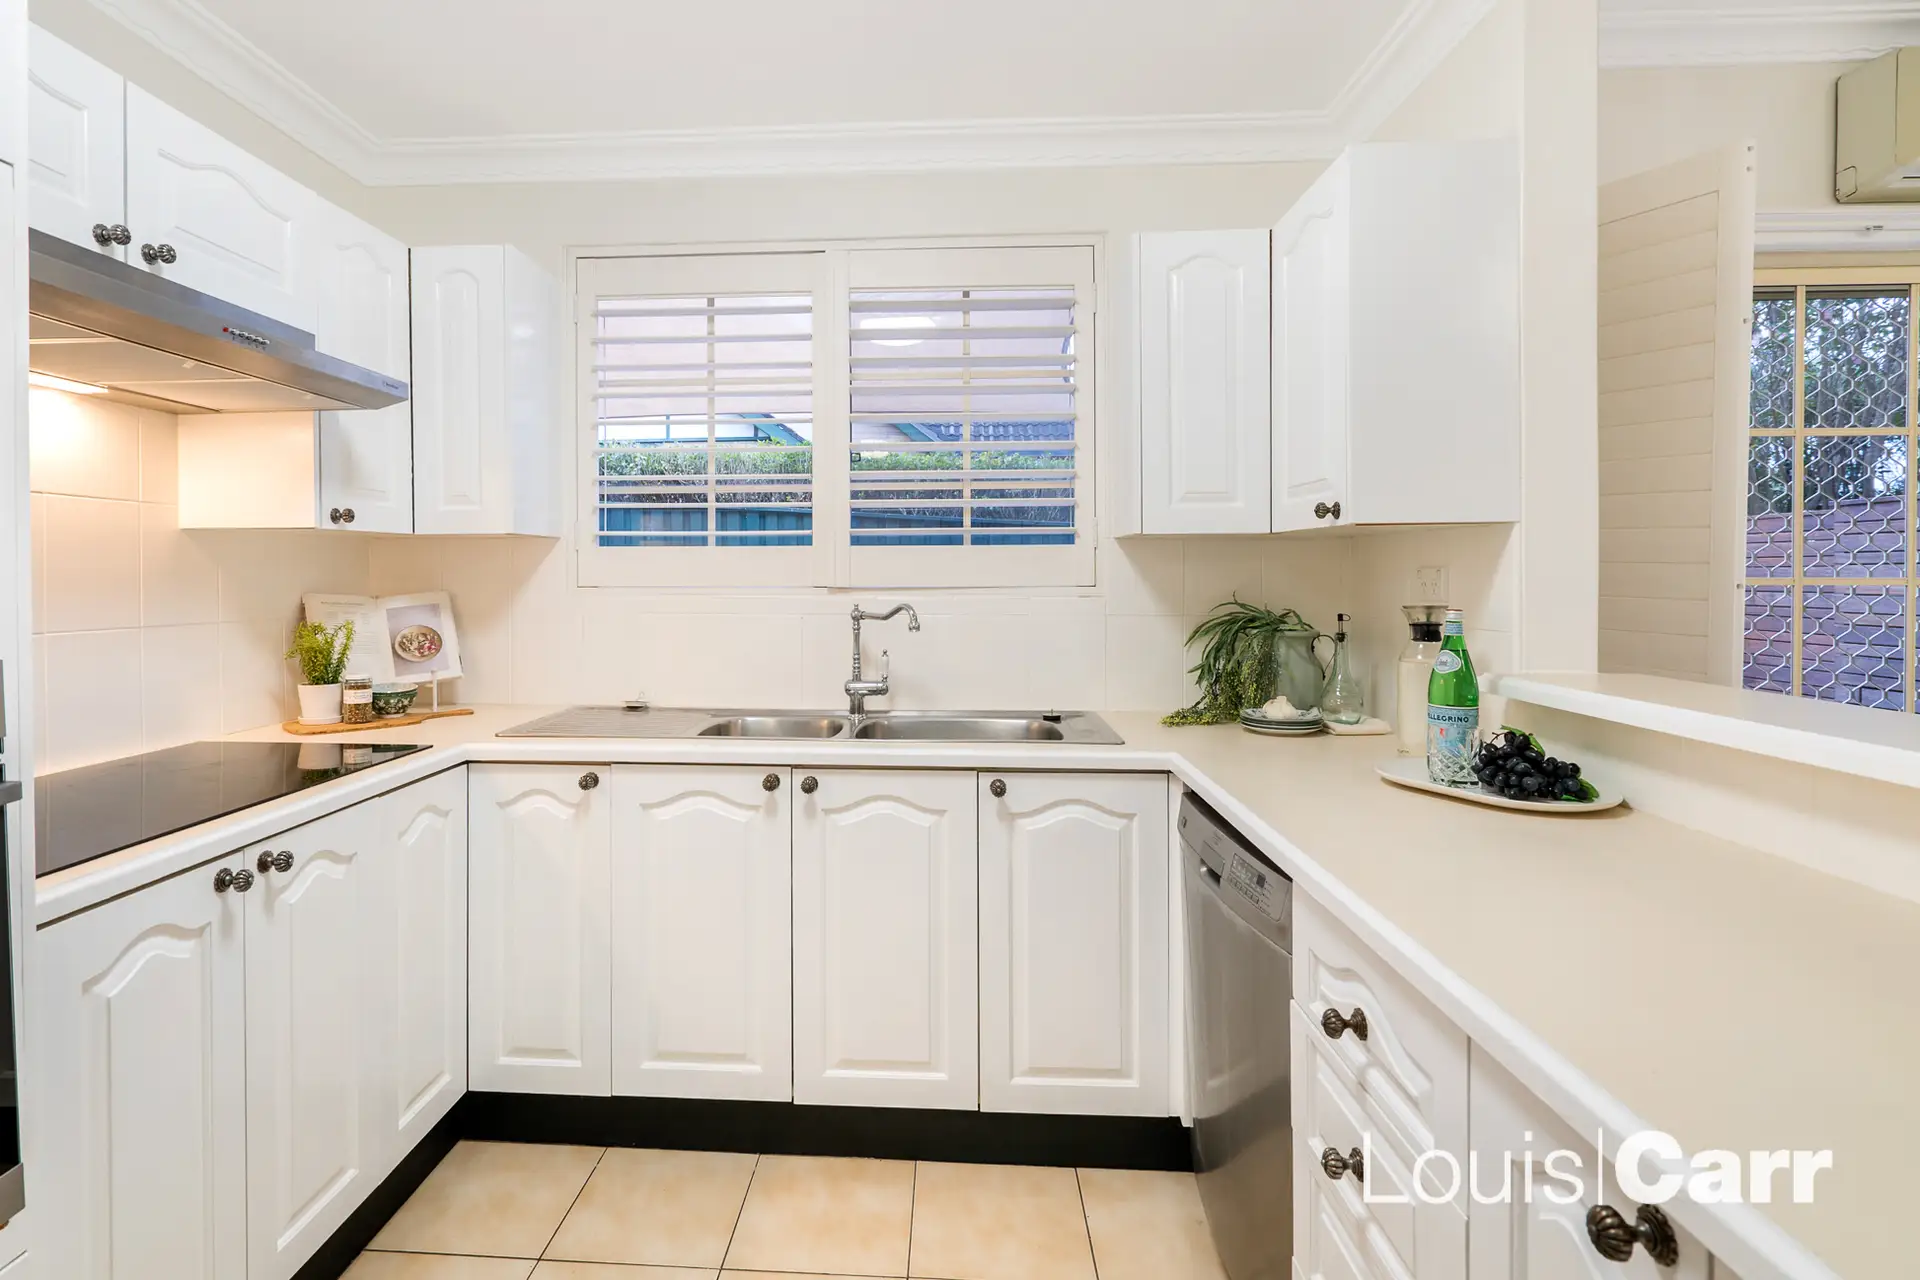 Photo #3: 1/165 Victoria Road, West Pennant Hills - Sold by Louis Carr Real Estate